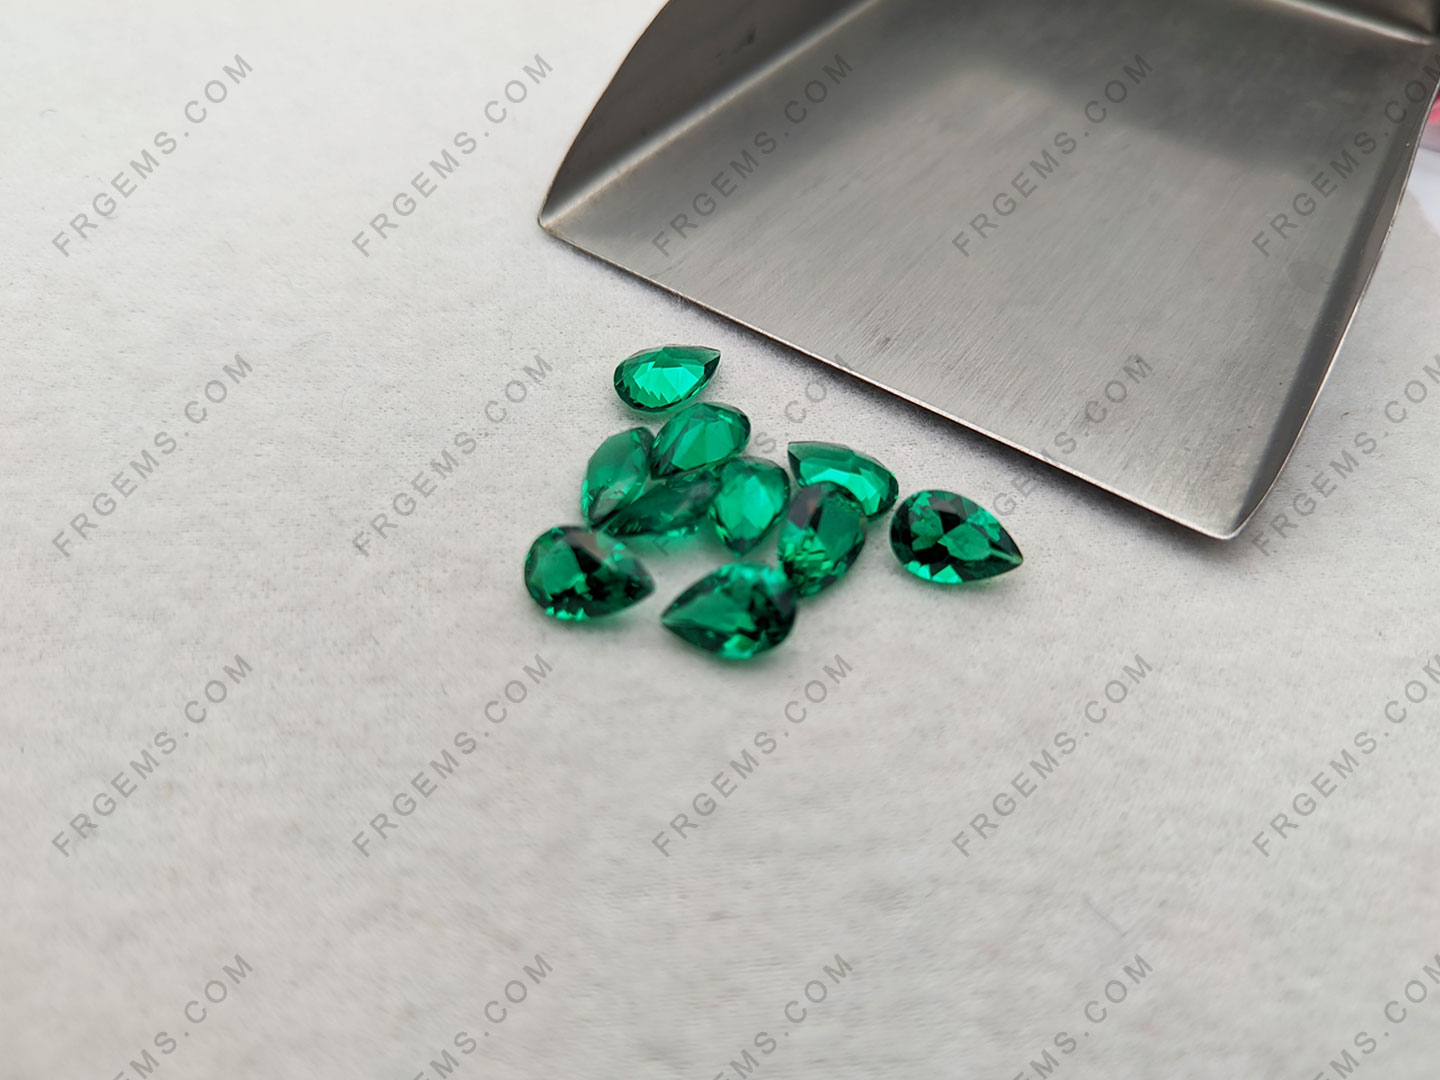 Loose Nano Crystal Emerald Green Color #113 Pear shape Faceted Cut 9x6mm gemstones